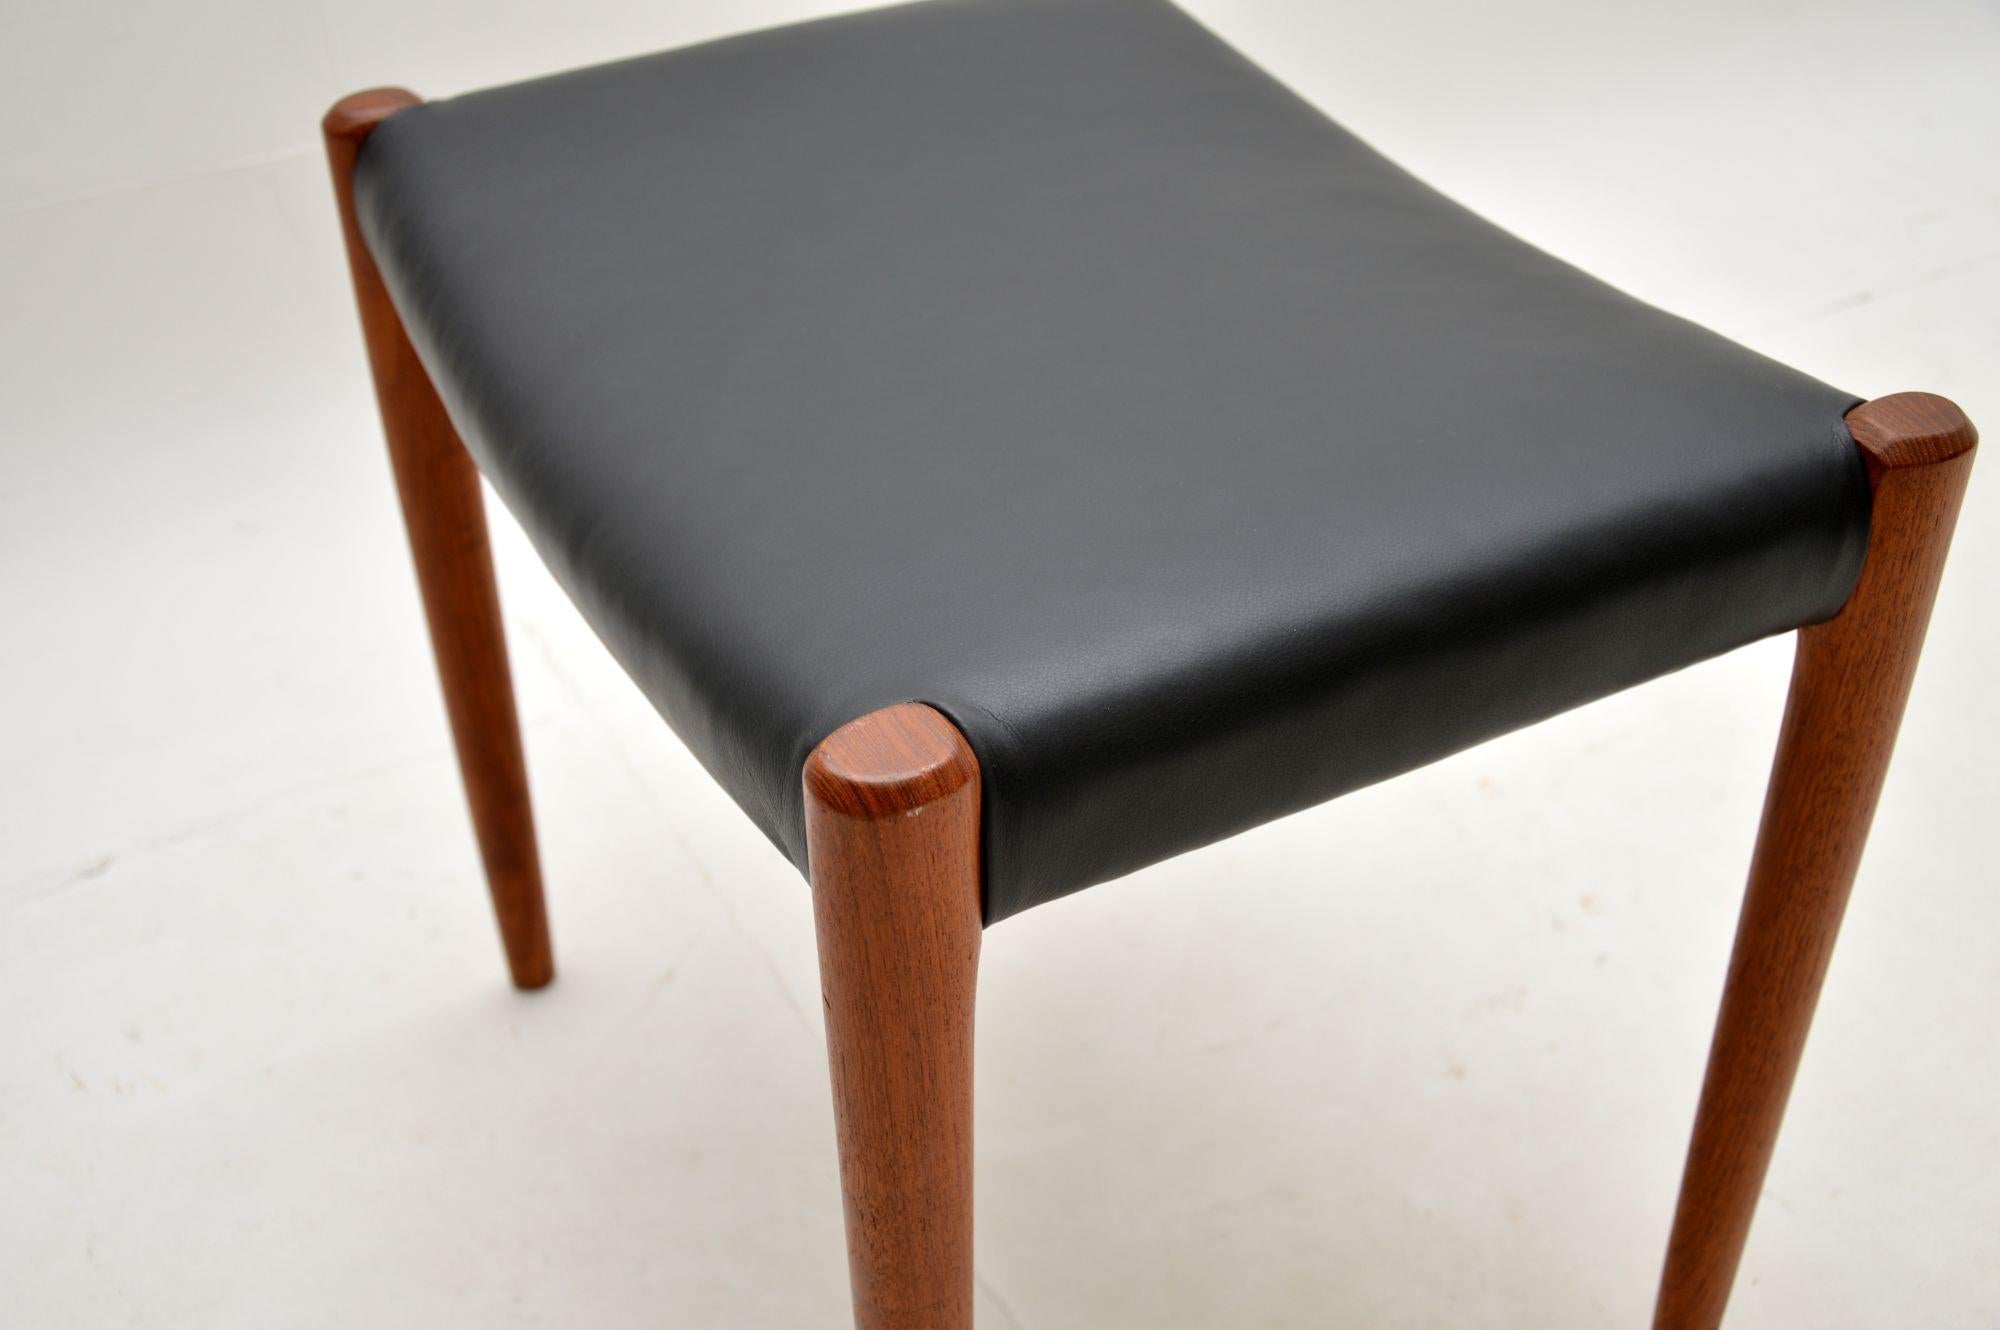 Mid-20th Century Danish Vintage Teak and Leather Stool by Niels Moller For Sale